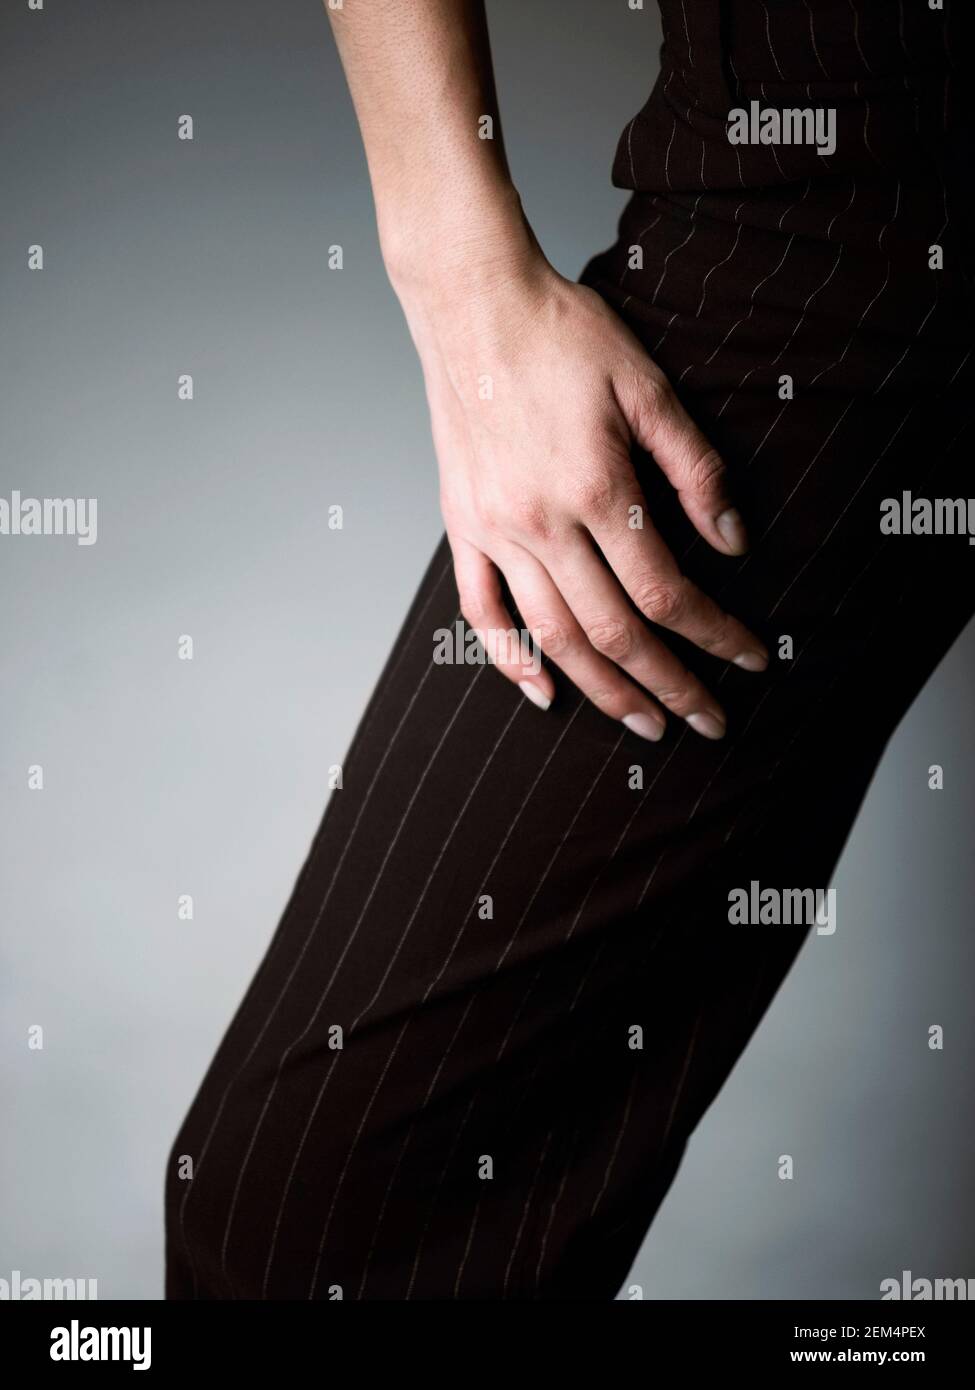 Mid section view of a woman Stock Photo